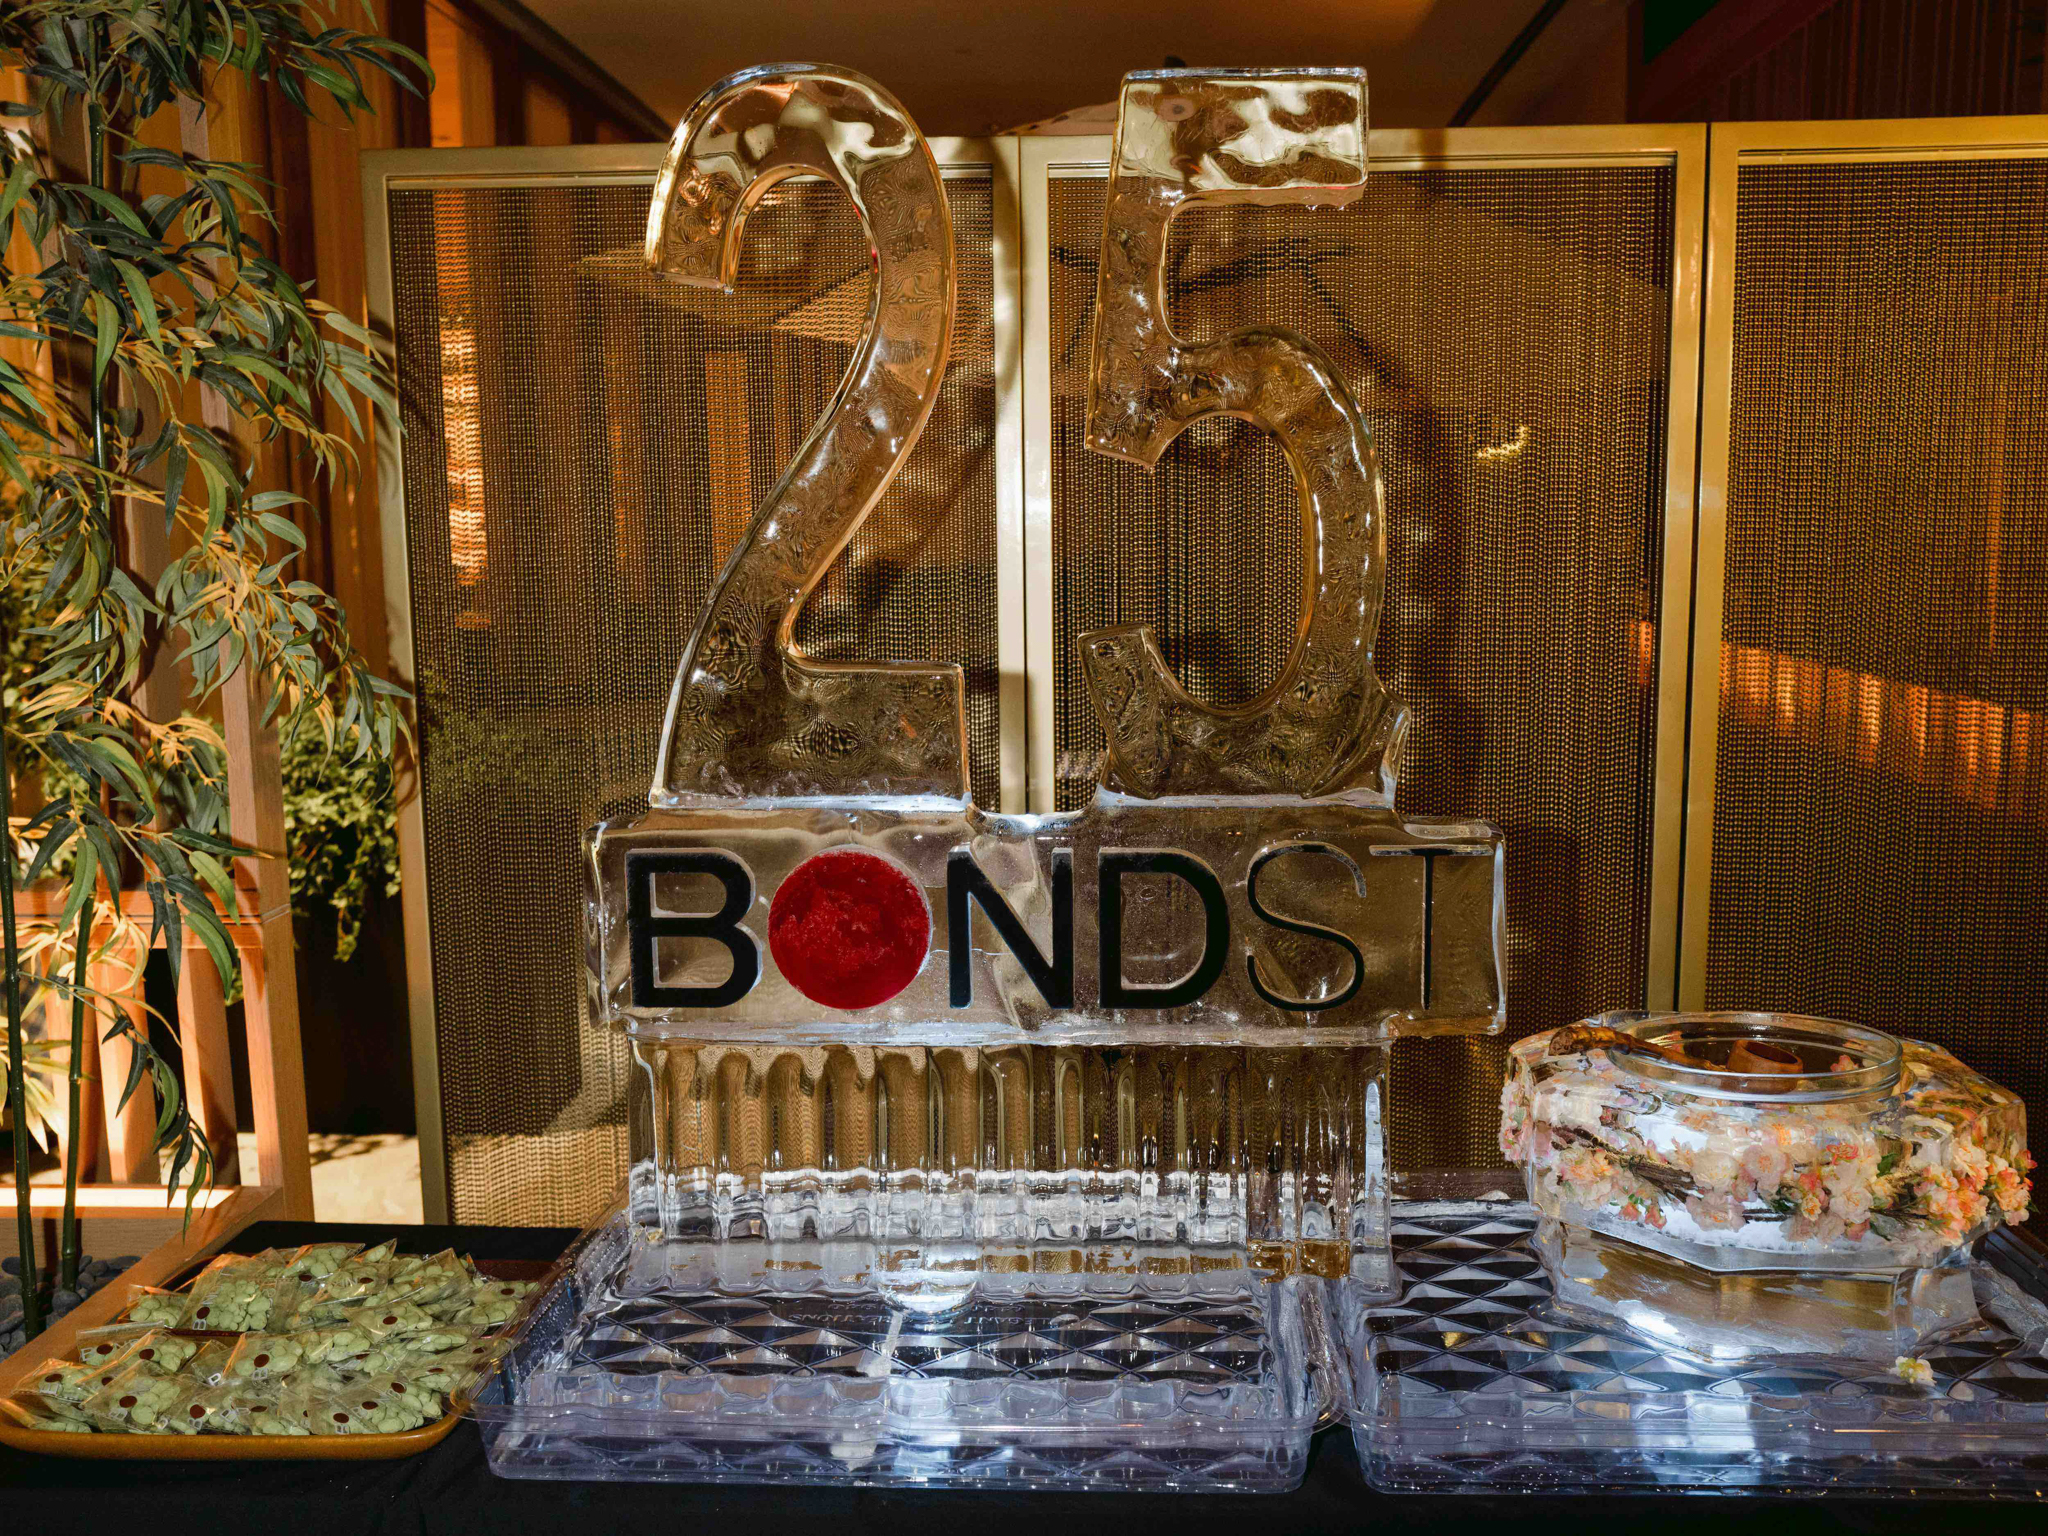 Celebrating 25 years of BondST hosted by Jonathan Morr